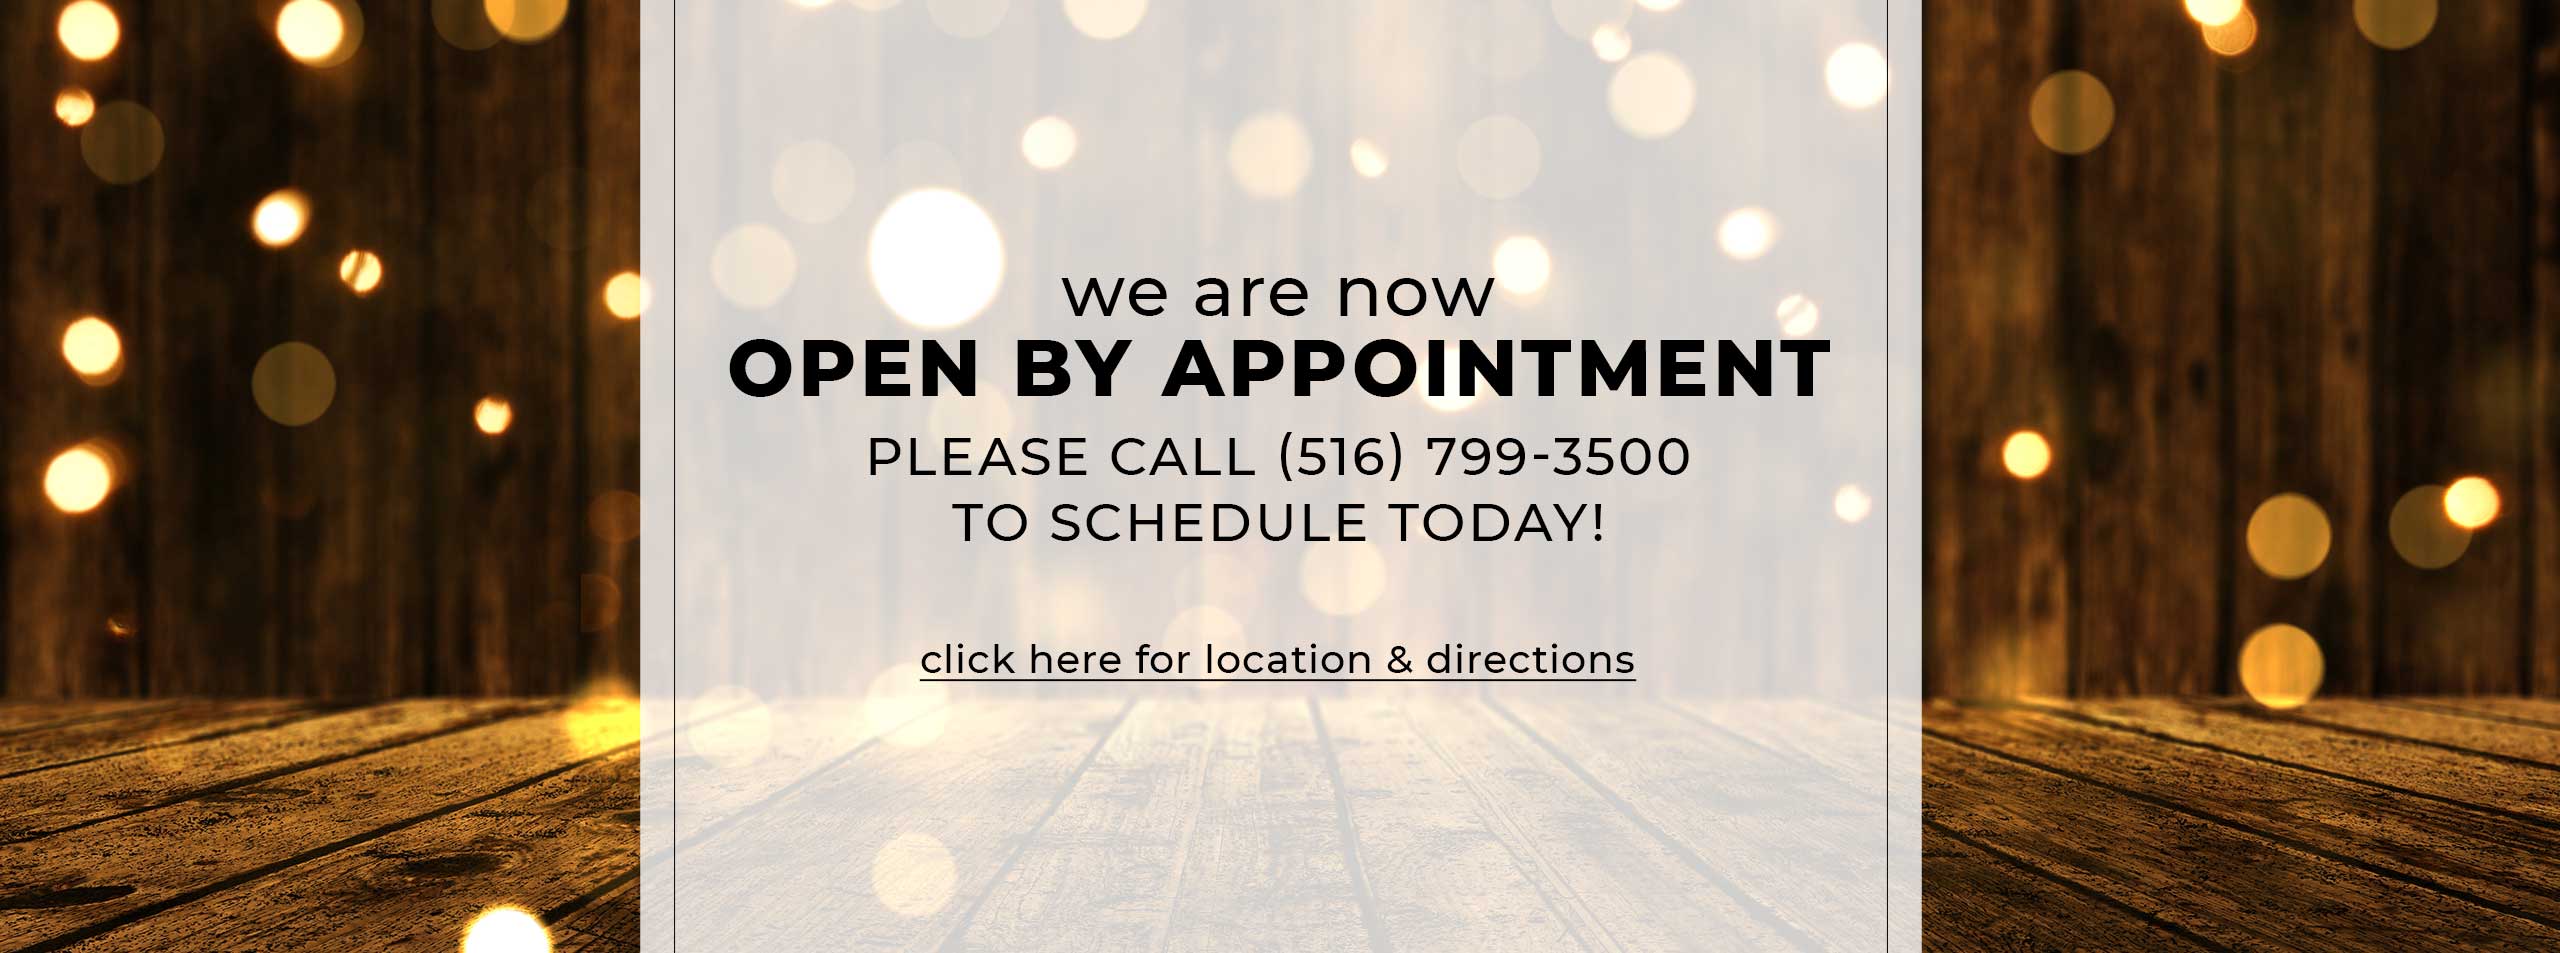 We're Open by Appointment - Contact Us